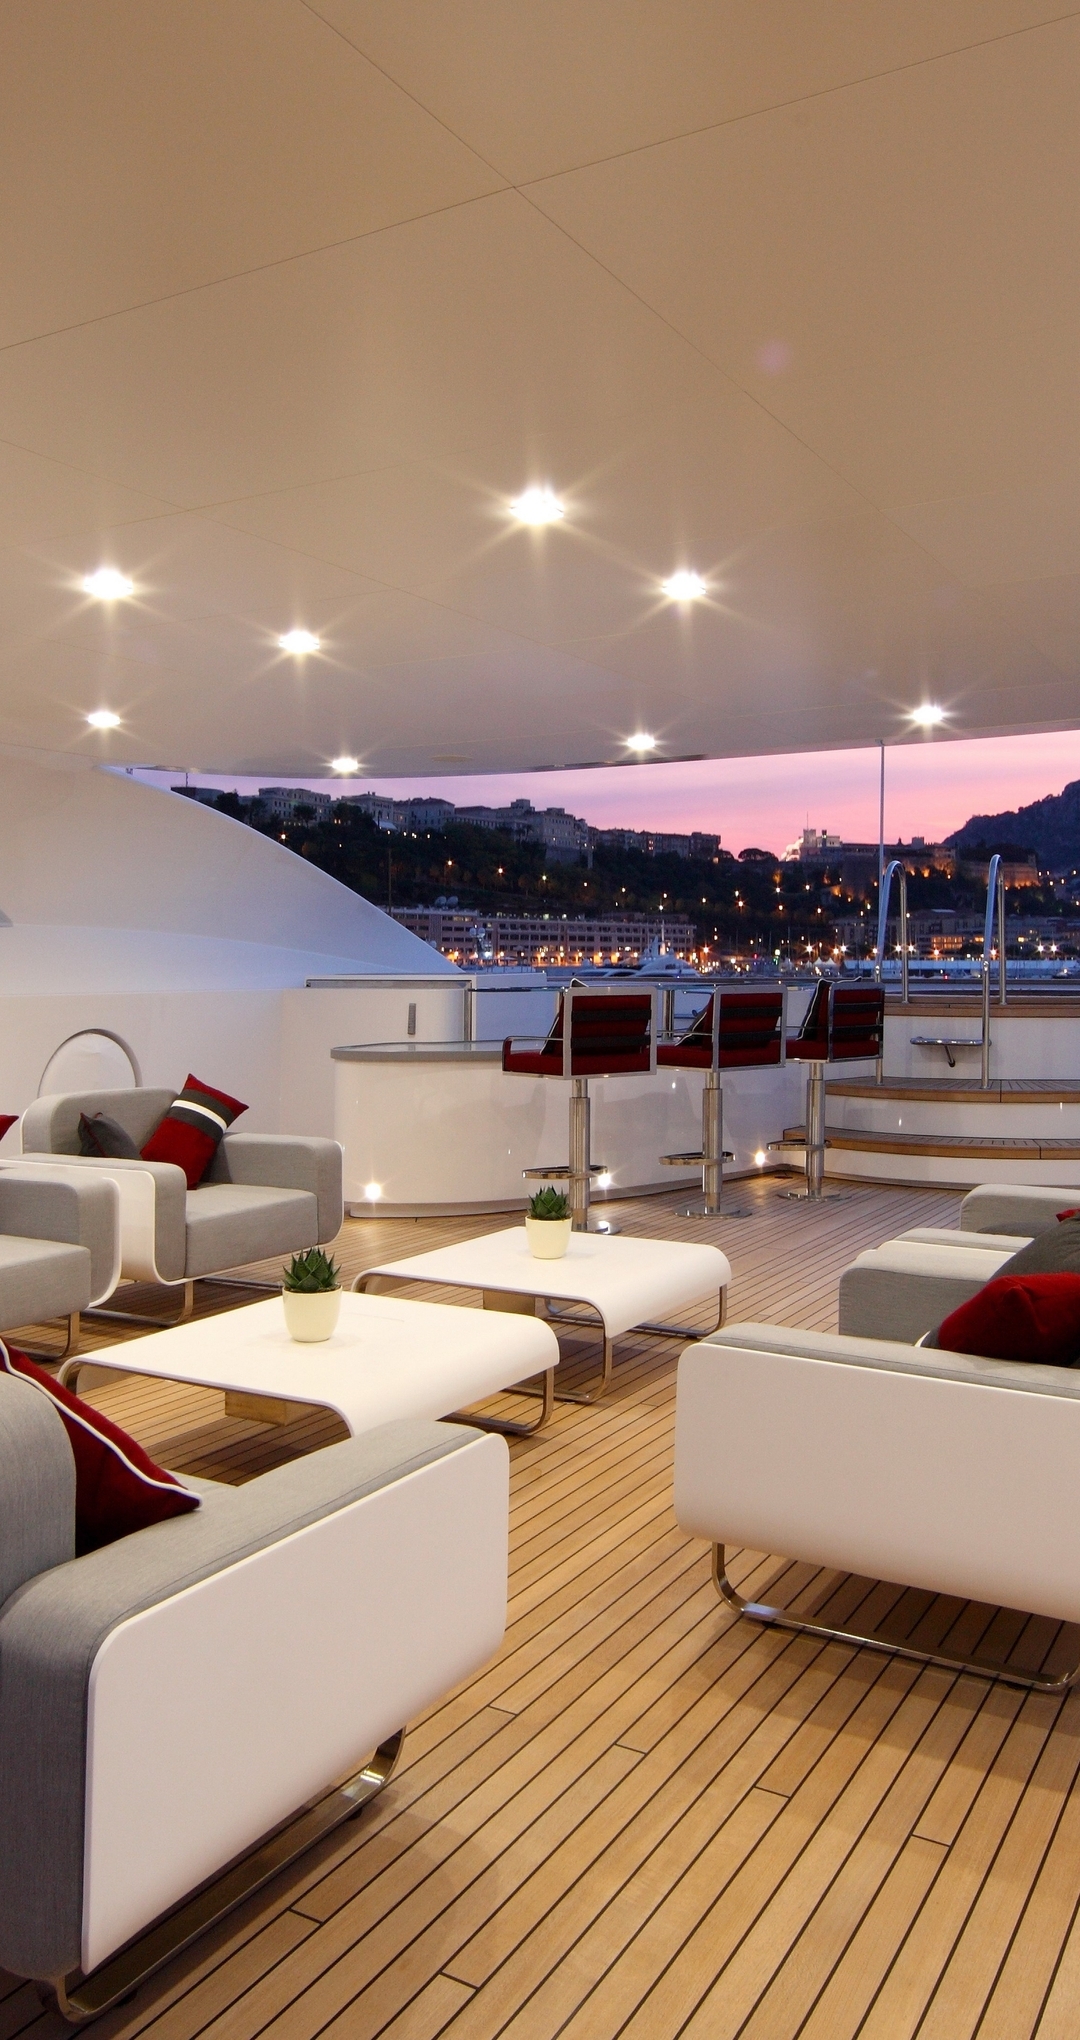 Image: A yacht, a couch, chairs, tables, bar stools, lights, night